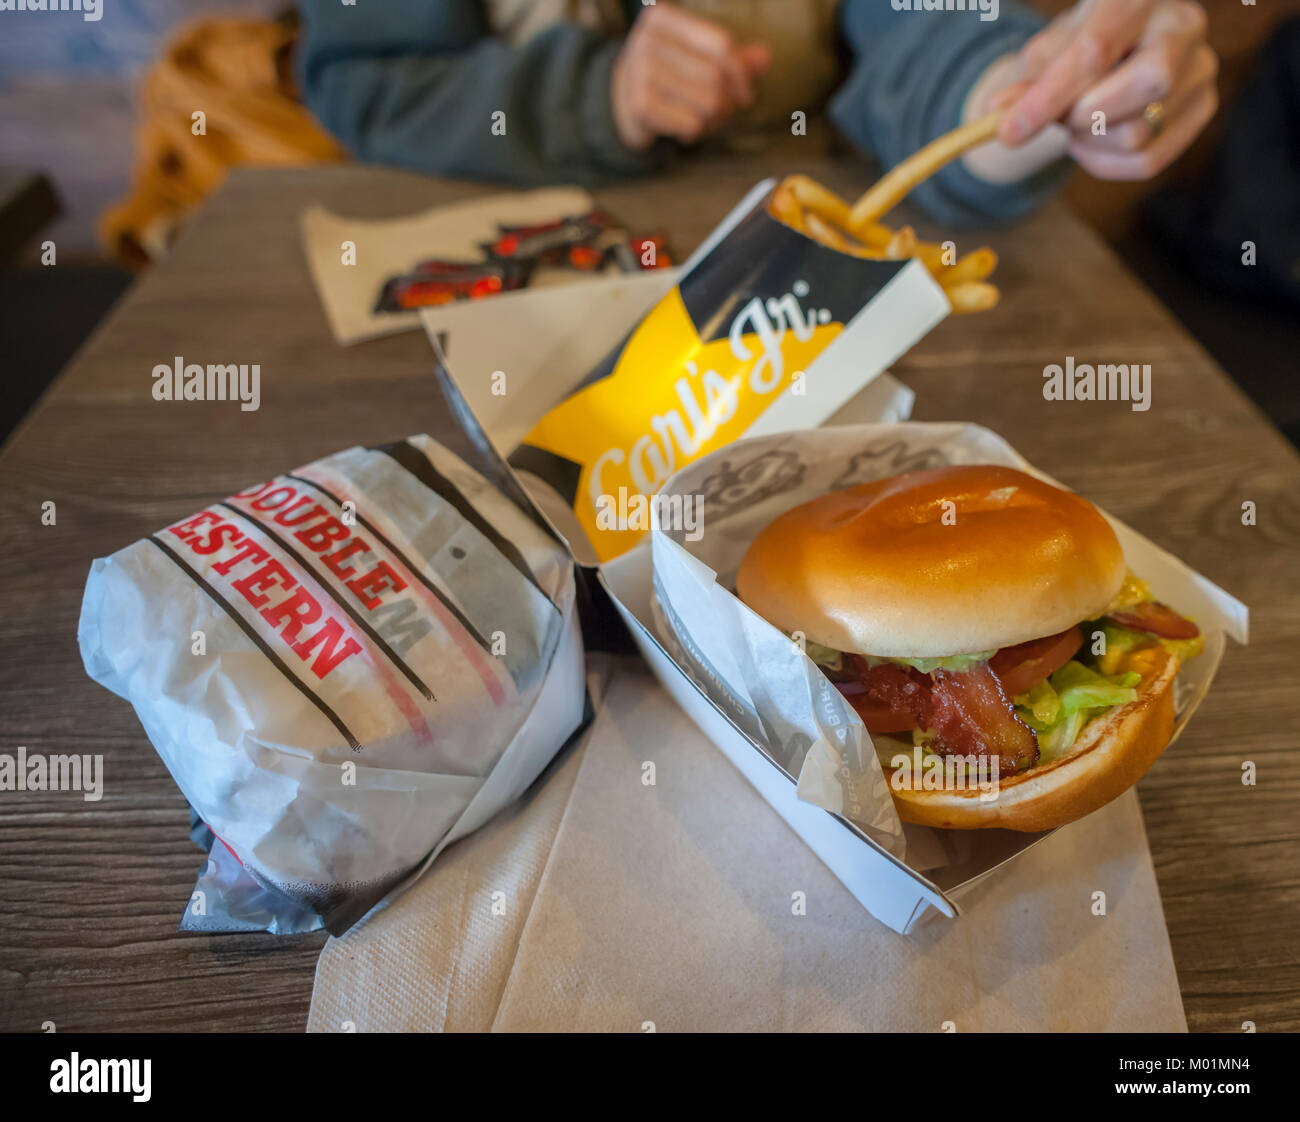 Hamburgers and fries at the first Carl's Jr. in New York in Brooklyn in Coney Island on Saturday, January 13, 2018. The fast food chain with over 1300 restaurants is entering the competitive New York market, opening a second location in Midtown Manhattan at the end of January. The chain, operated by CKE Restaurant Holdings (which also owns the Hardee's brand) has less than 10 of its franchises east of Oklahoma. (Â© Richard B. Levine) Stock Photo